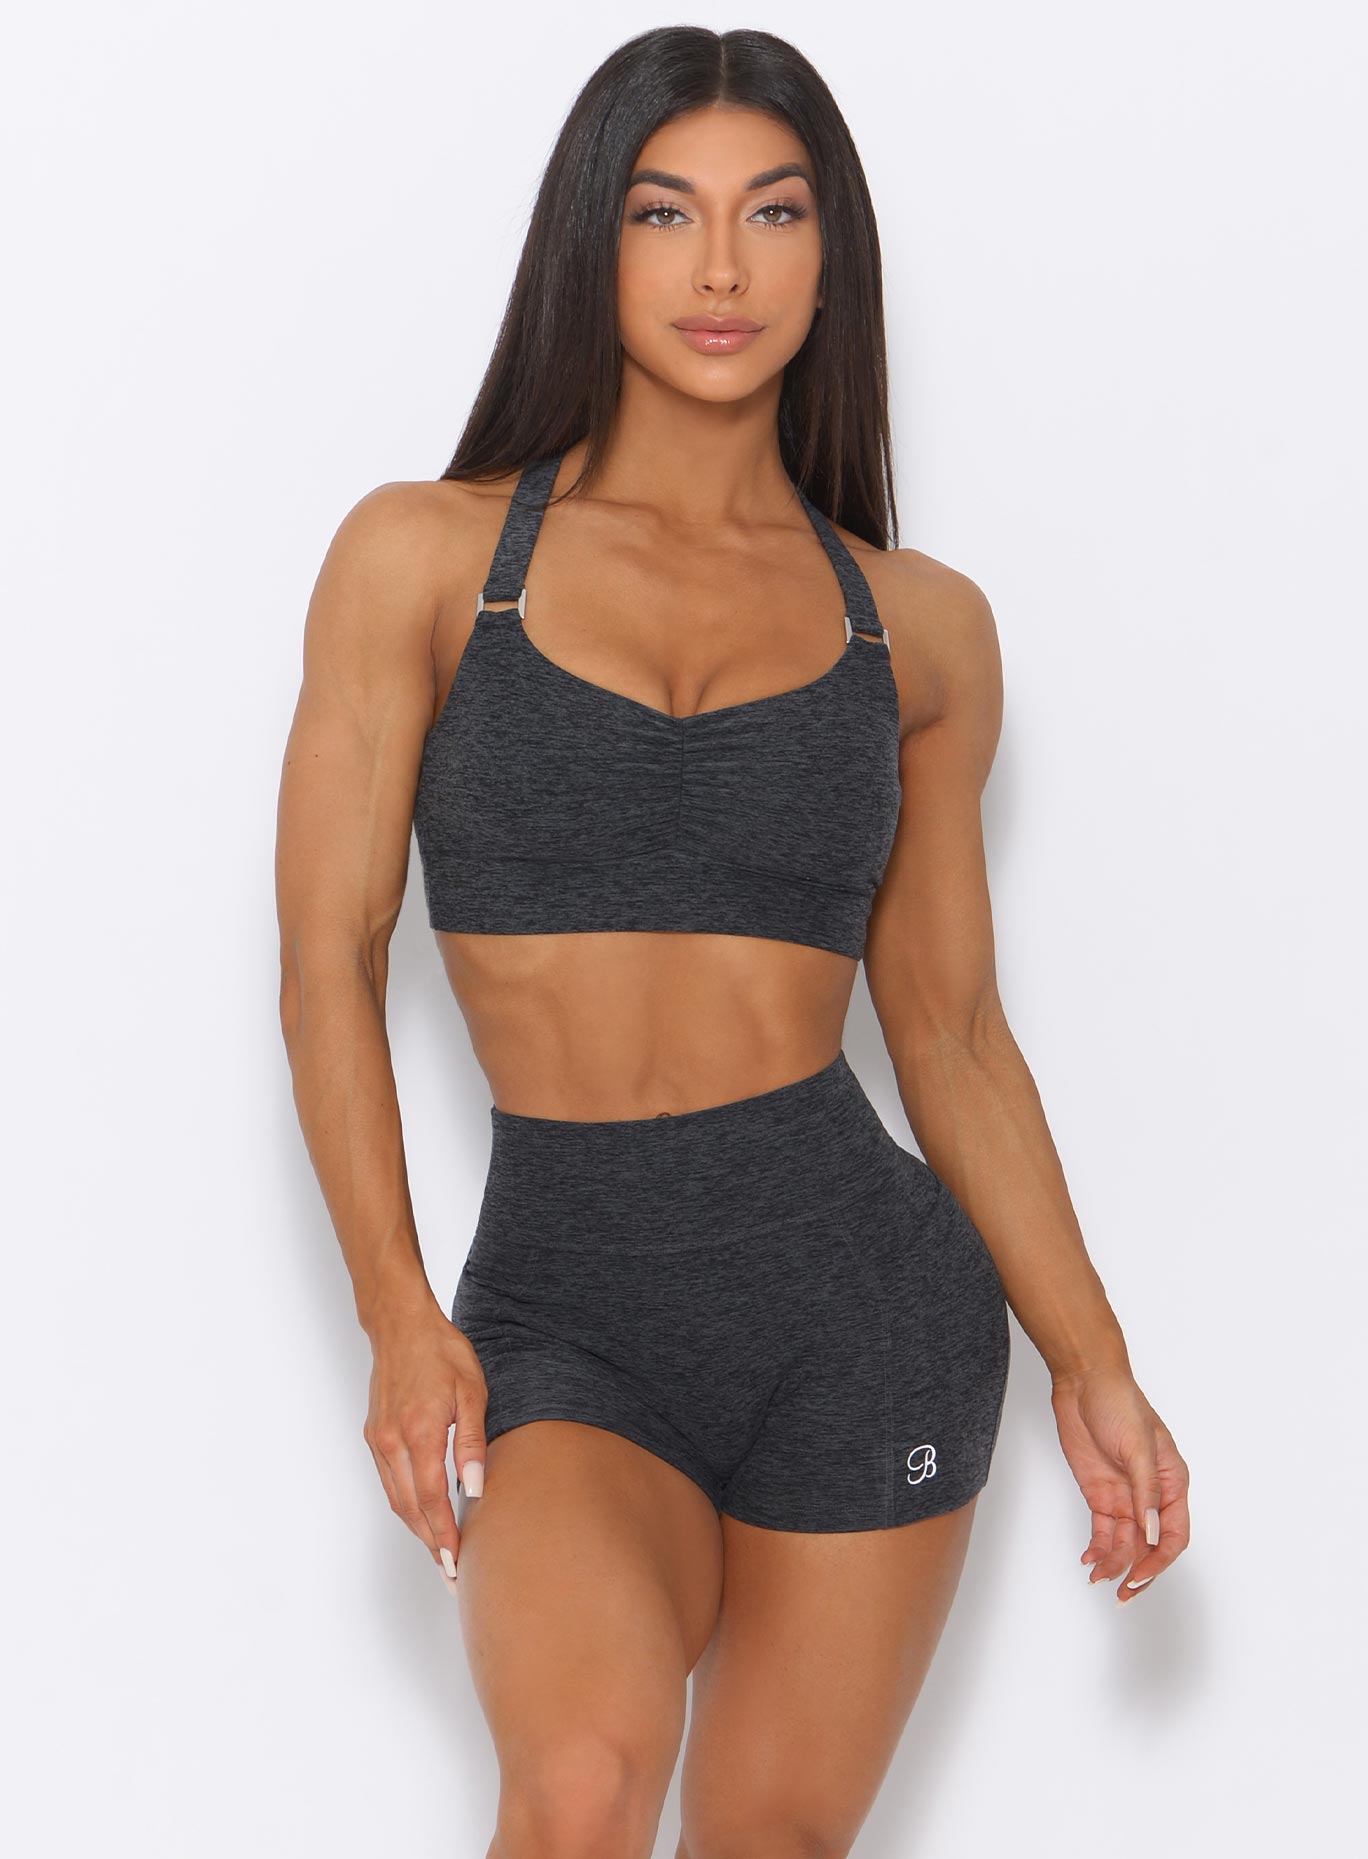 Front view of the model wearing our perfection sports bra in charcoal color and a matching shorts